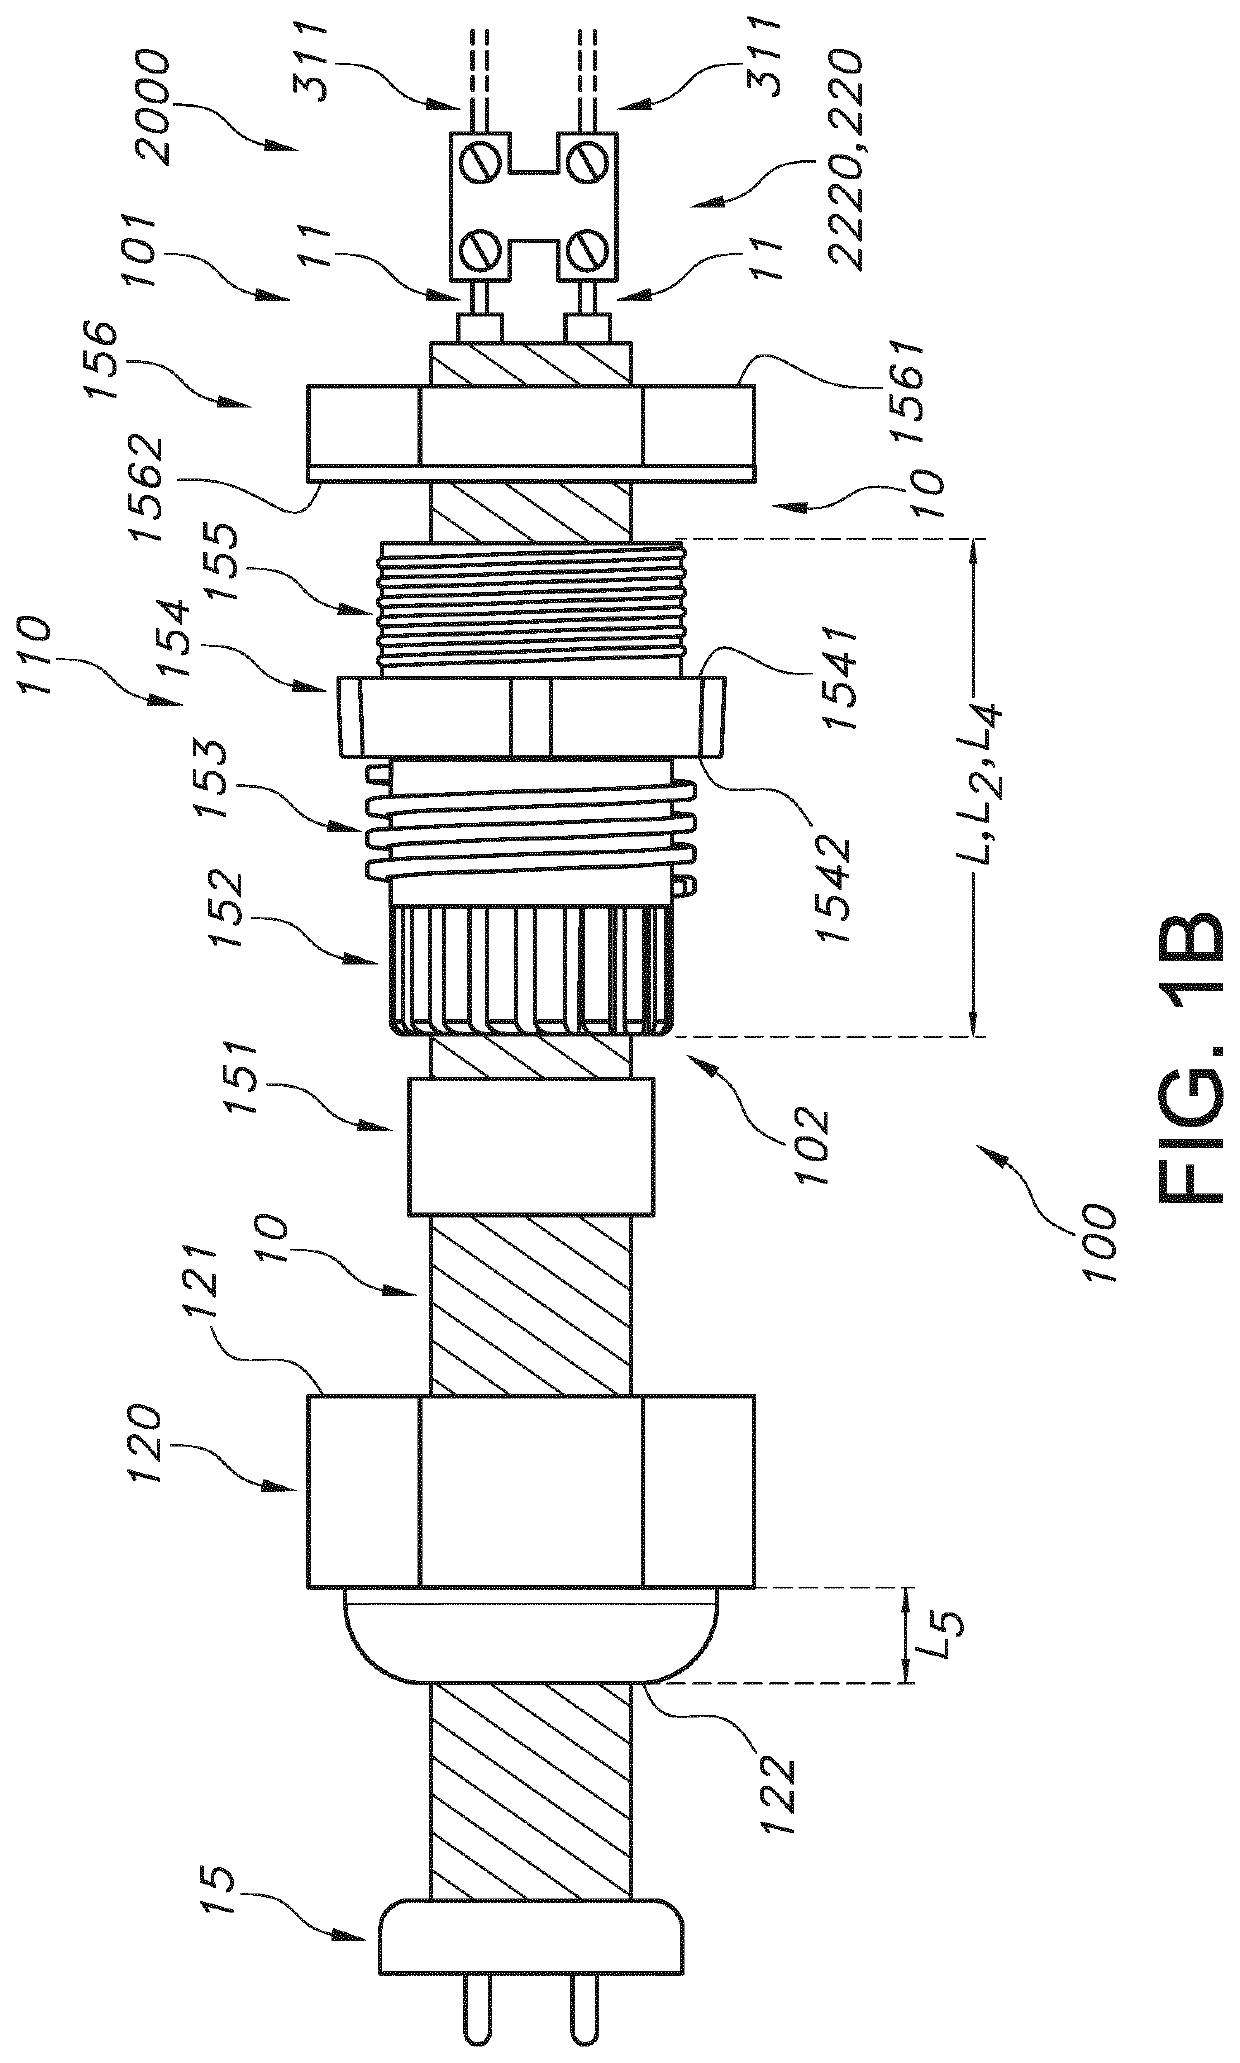 Kit of parts comprising a cable gland, a wire transport element and a housing, system made of such a kit, and method for functionally connecting the system